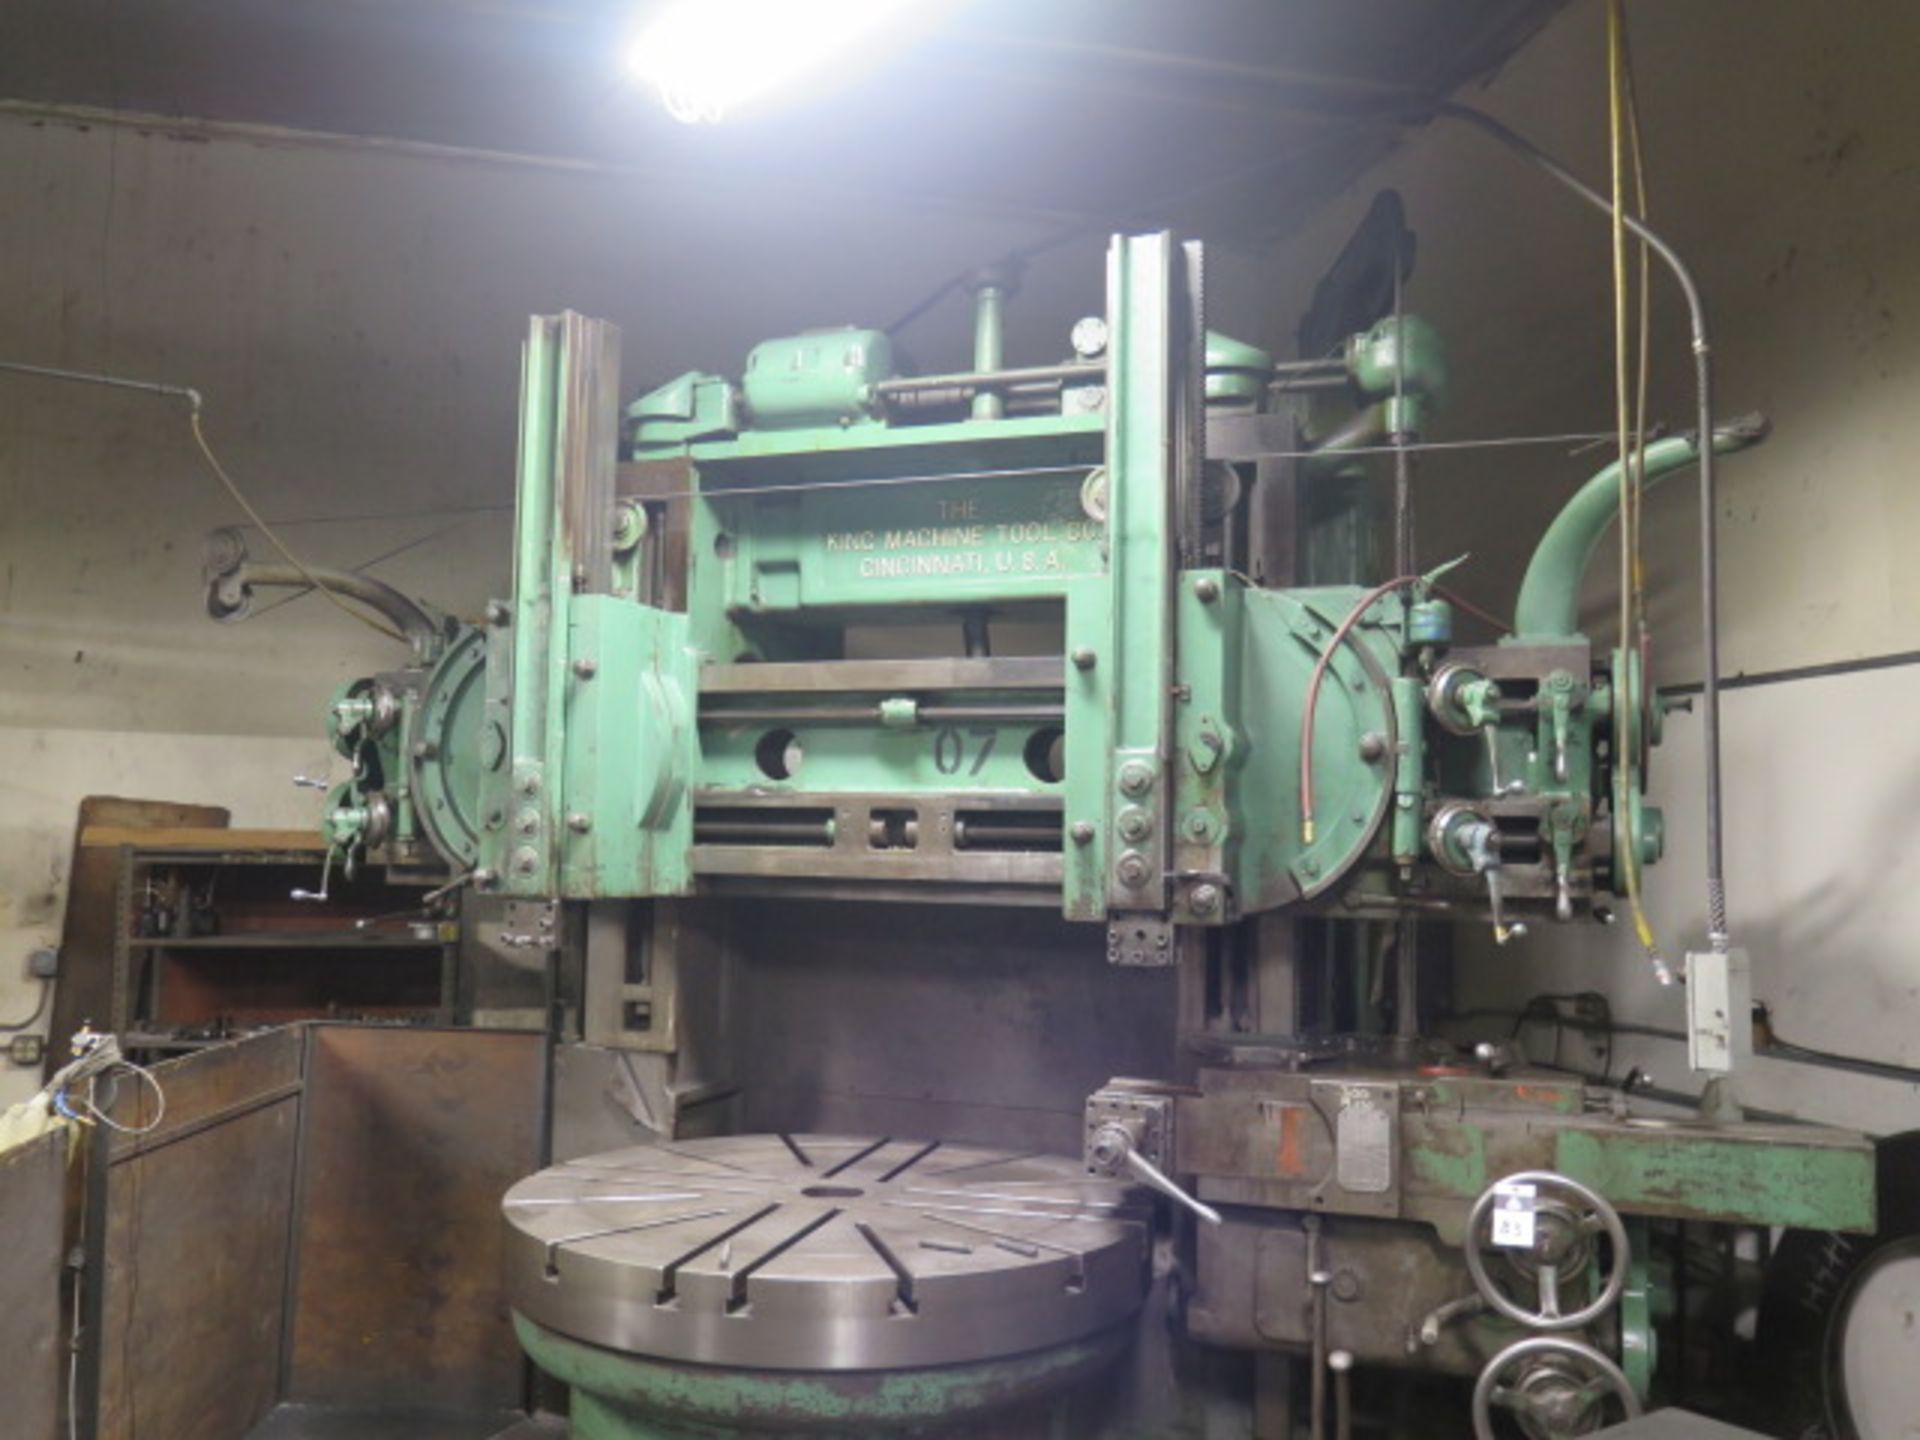 King 62” Vertical Boring Mill s/n 2076 w/Controls, 70” Swing, 1.7-83.4 RPM, (2) Facing/, SOLD AS IS - Image 2 of 18